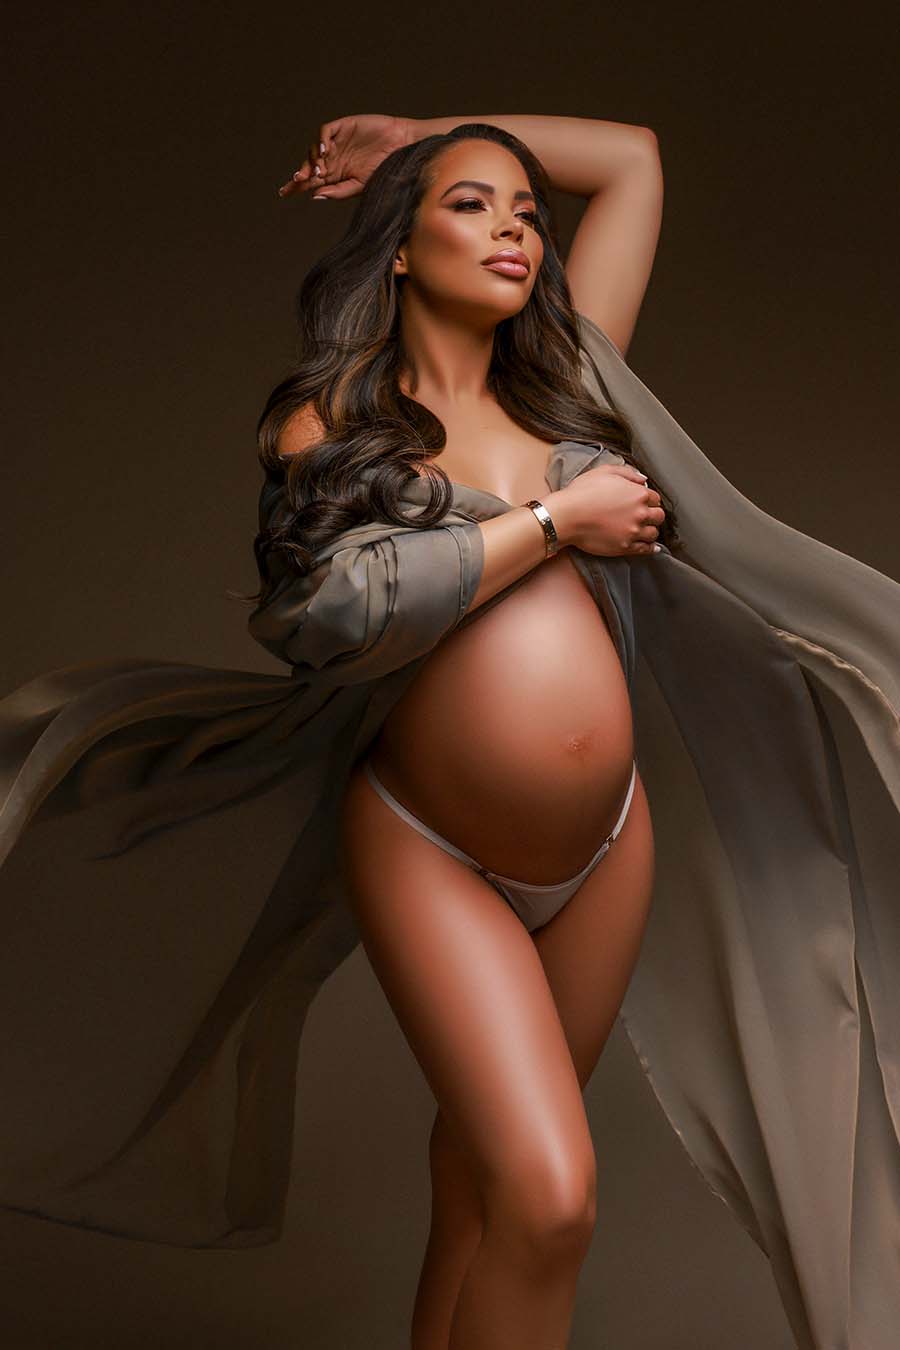 Pregnant model poses during her maternity photoshoot wearing a draping fabric made of voile in taupe color. she cover her breasts with the scarf and has her belly uncovered. She has her eyes closed and one hand above her head during the close up.